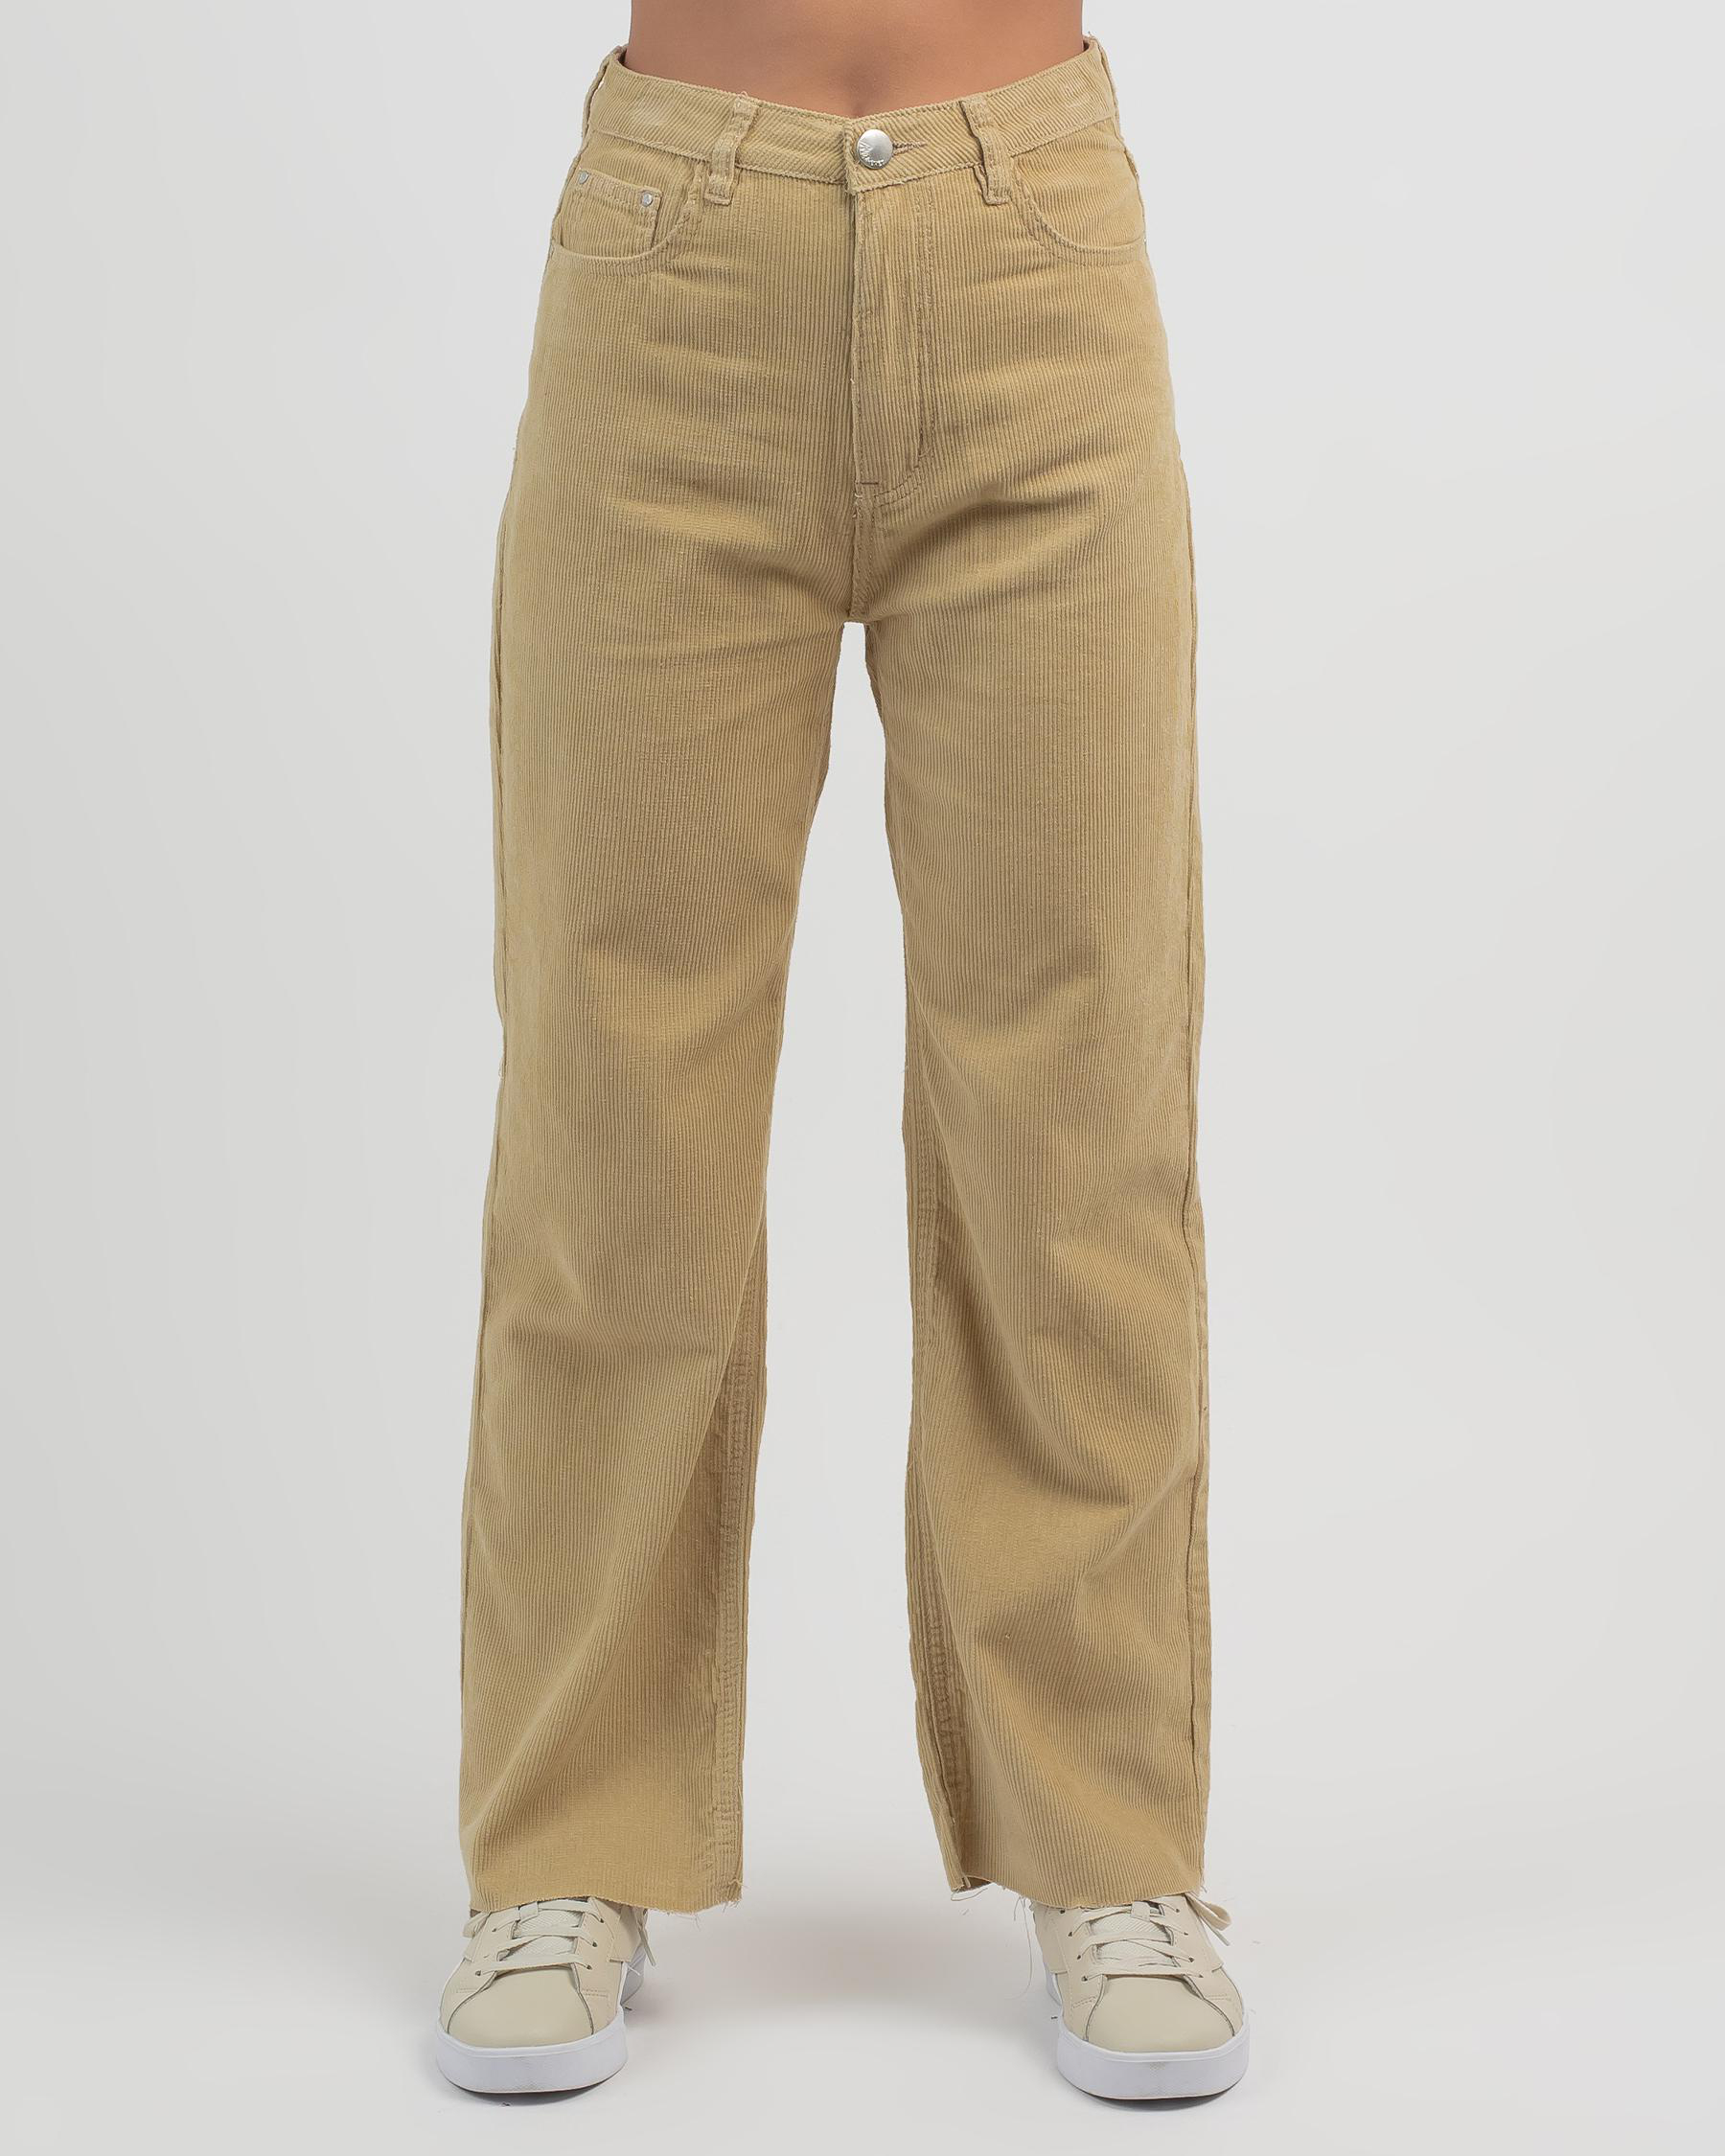 Shop Ava And Ever Girls' Ramona Pants In Sand - Fast Shipping & Easy ...